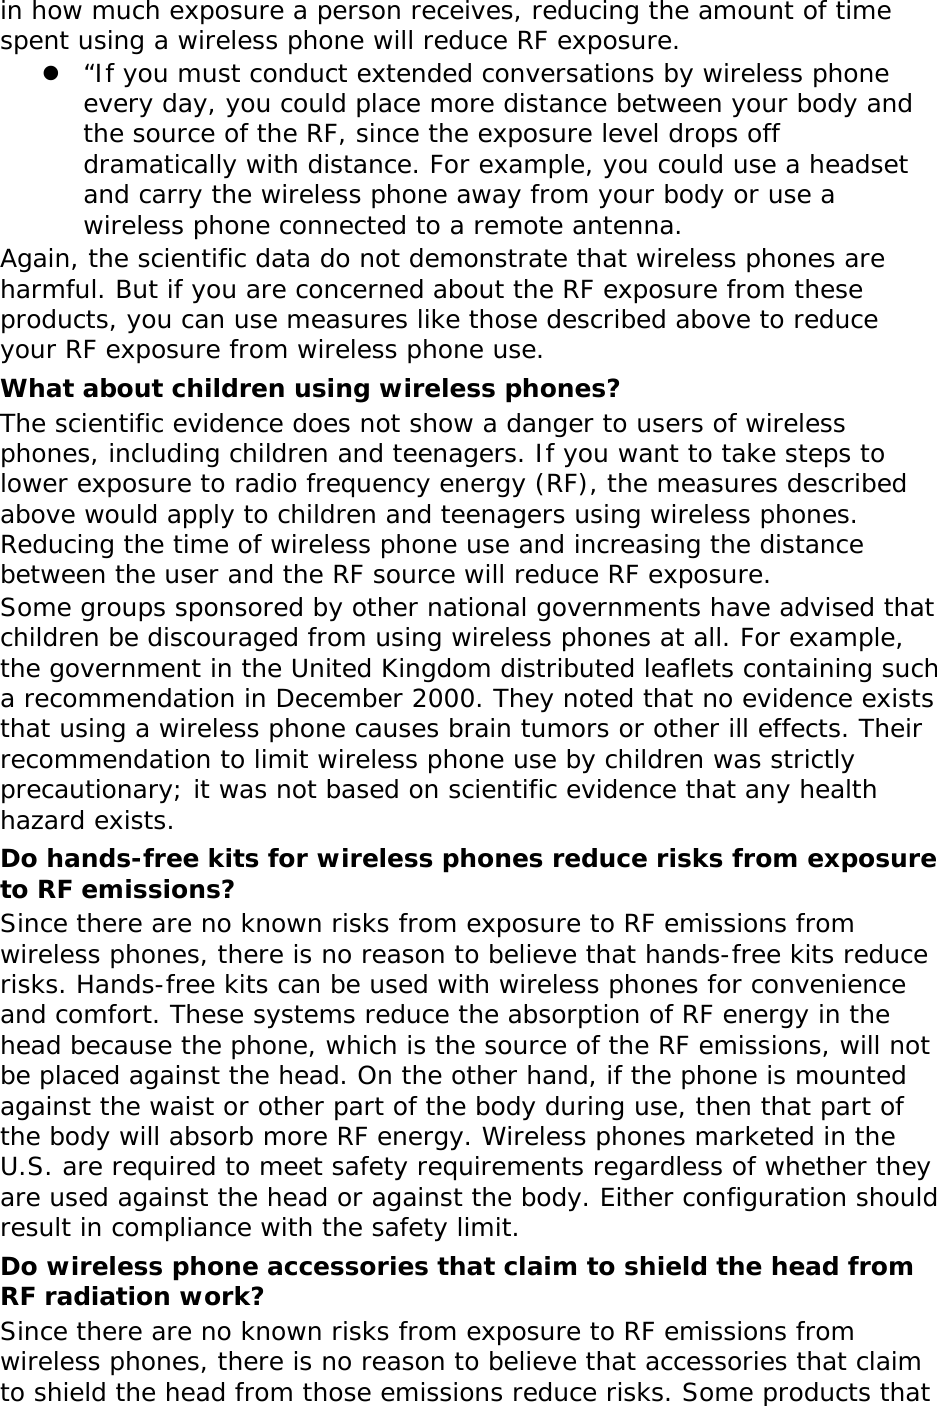 in how much exposure a person receives, reducing the amount of time spent using a wireless phone will reduce RF exposure. z “If you must conduct extended conversations by wireless phone every day, you could place more distance between your body and the source of the RF, since the exposure level drops off dramatically with distance. For example, you could use a headset and carry the wireless phone away from your body or use a wireless phone connected to a remote antenna. Again, the scientific data do not demonstrate that wireless phones are harmful. But if you are concerned about the RF exposure from these products, you can use measures like those described above to reduce your RF exposure from wireless phone use. What about children using wireless phones? The scientific evidence does not show a danger to users of wireless phones, including children and teenagers. If you want to take steps to lower exposure to radio frequency energy (RF), the measures described above would apply to children and teenagers using wireless phones. Reducing the time of wireless phone use and increasing the distance between the user and the RF source will reduce RF exposure. Some groups sponsored by other national governments have advised that children be discouraged from using wireless phones at all. For example, the government in the United Kingdom distributed leaflets containing such a recommendation in December 2000. They noted that no evidence exists that using a wireless phone causes brain tumors or other ill effects. Their recommendation to limit wireless phone use by children was strictly precautionary; it was not based on scientific evidence that any health hazard exists.  Do hands-free kits for wireless phones reduce risks from exposure to RF emissions? Since there are no known risks from exposure to RF emissions from wireless phones, there is no reason to believe that hands-free kits reduce risks. Hands-free kits can be used with wireless phones for convenience and comfort. These systems reduce the absorption of RF energy in the head because the phone, which is the source of the RF emissions, will not be placed against the head. On the other hand, if the phone is mounted against the waist or other part of the body during use, then that part of the body will absorb more RF energy. Wireless phones marketed in the U.S. are required to meet safety requirements regardless of whether they are used against the head or against the body. Either configuration should result in compliance with the safety limit. Do wireless phone accessories that claim to shield the head from RF radiation work? Since there are no known risks from exposure to RF emissions from wireless phones, there is no reason to believe that accessories that claim to shield the head from those emissions reduce risks. Some products that 